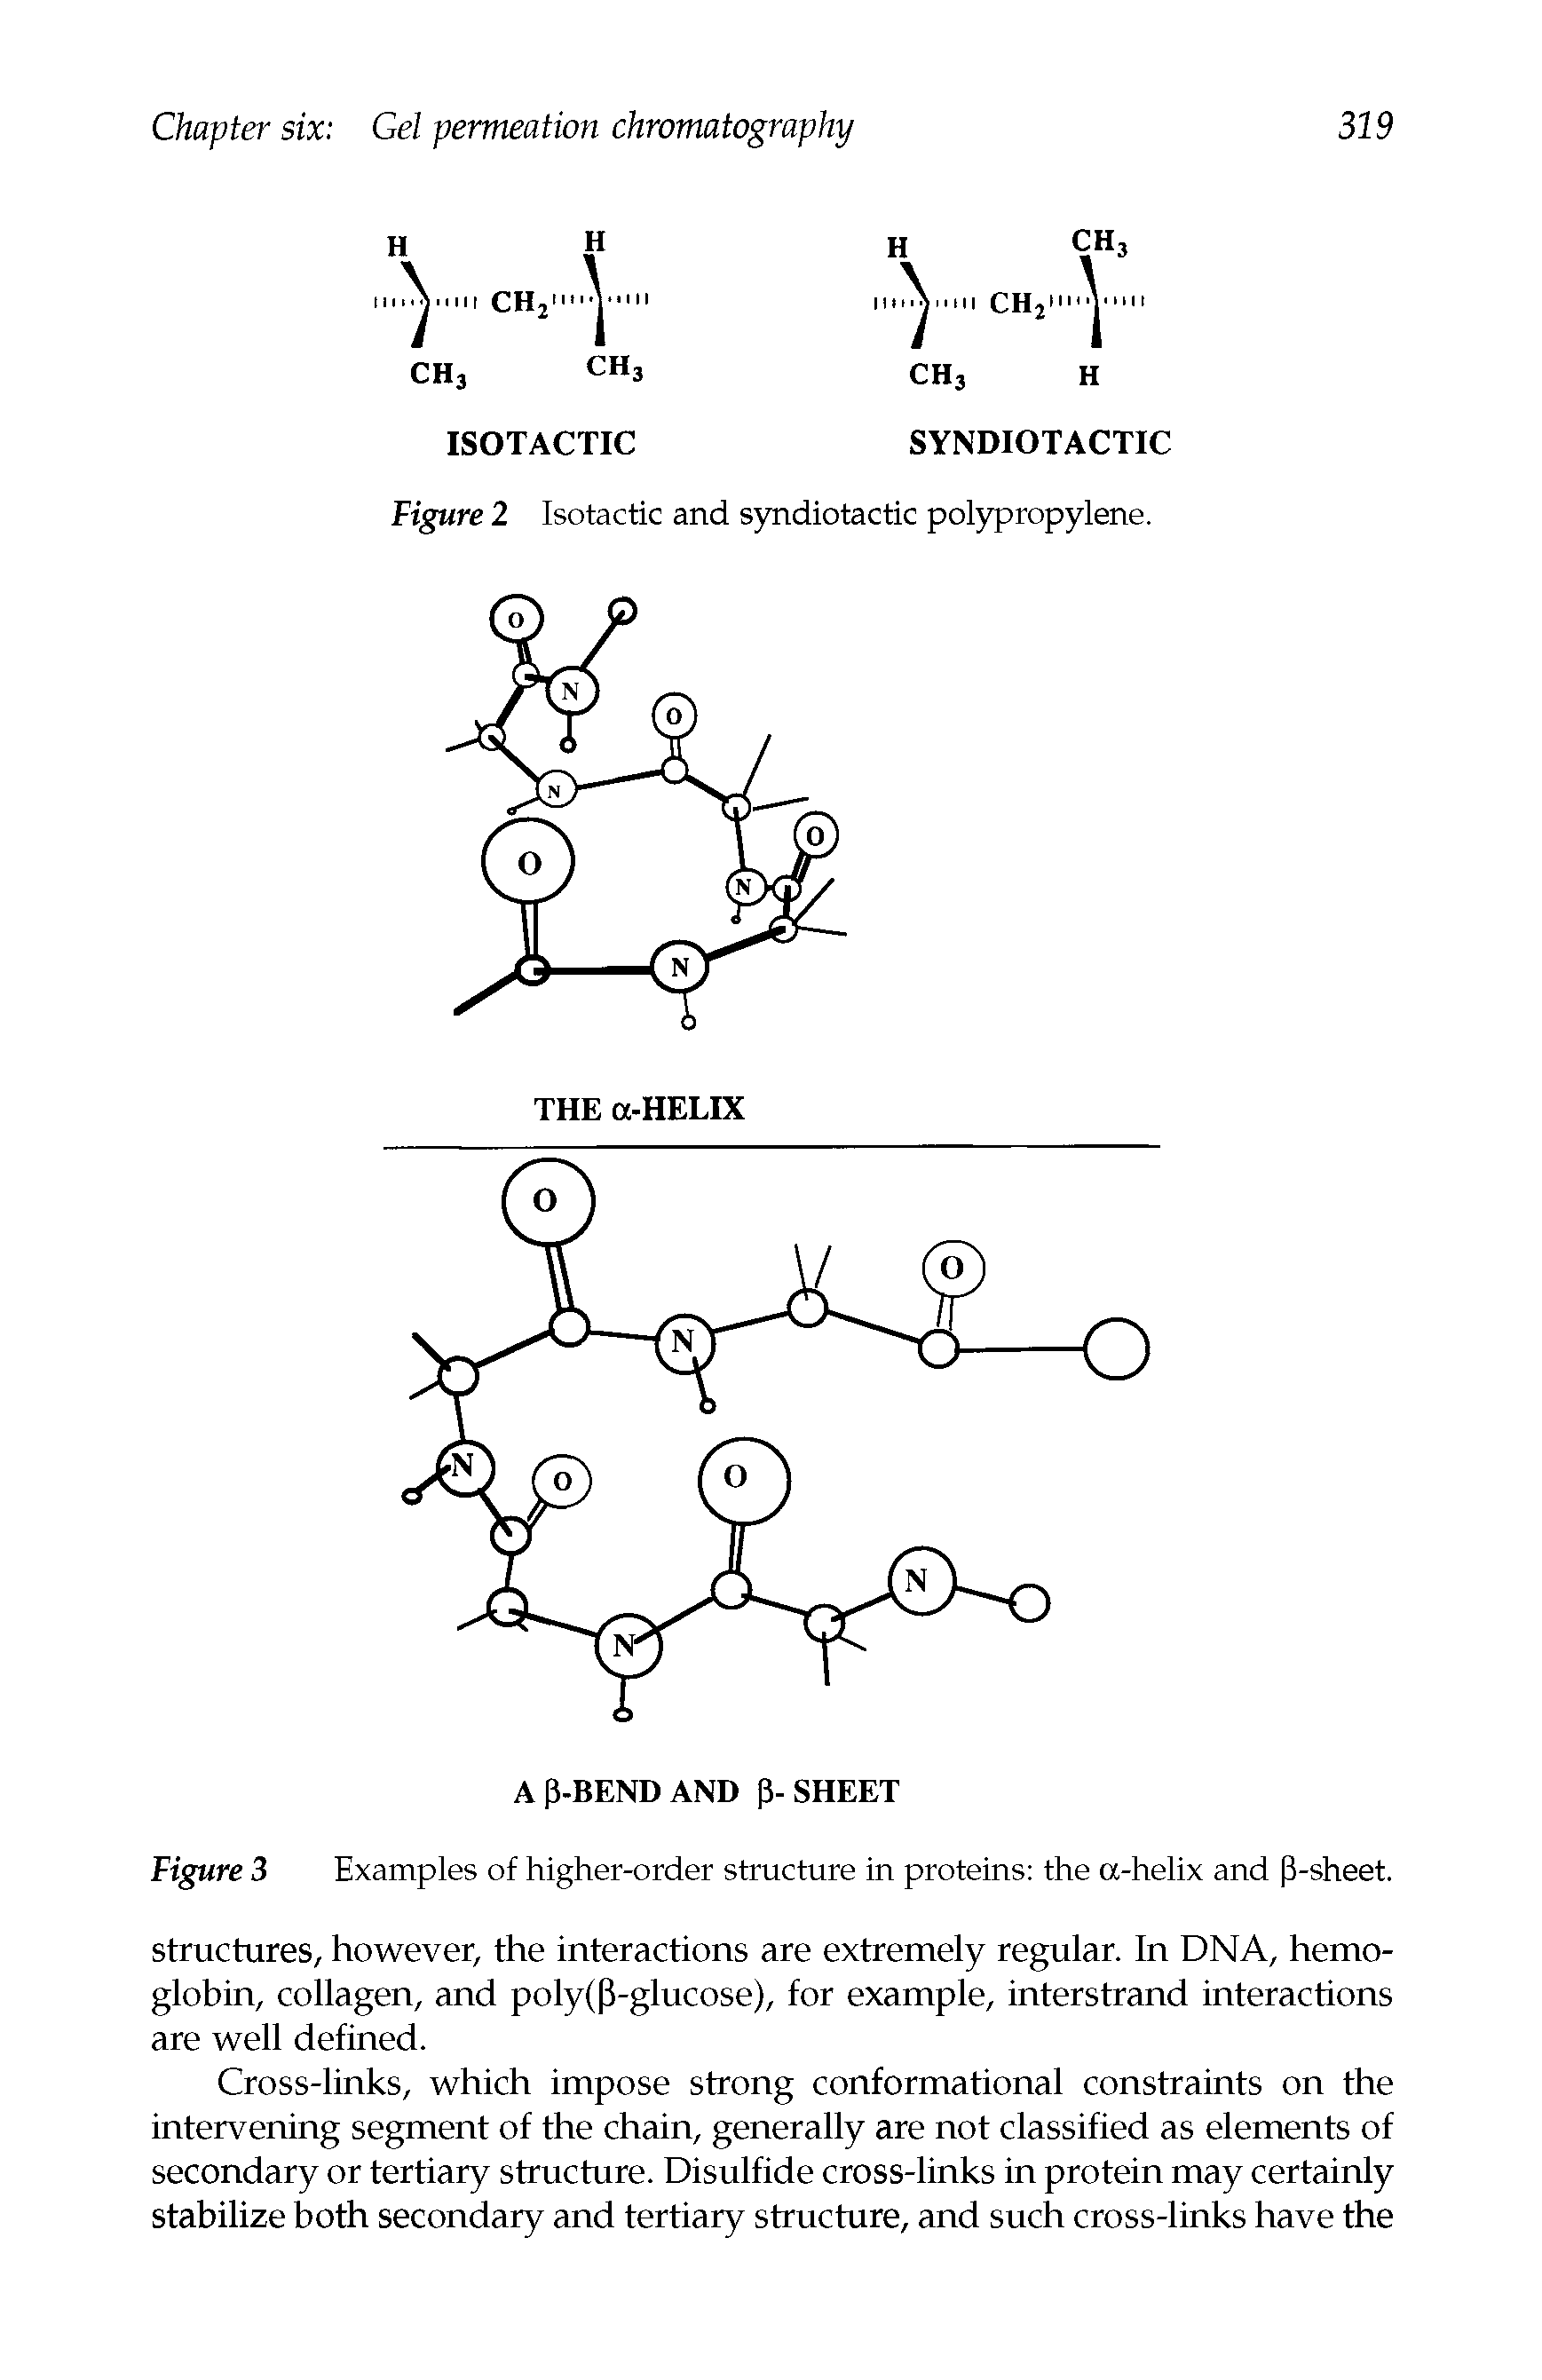 Figure 3 Examples of higher-order structure in proteins the a-helix and P-sheet.